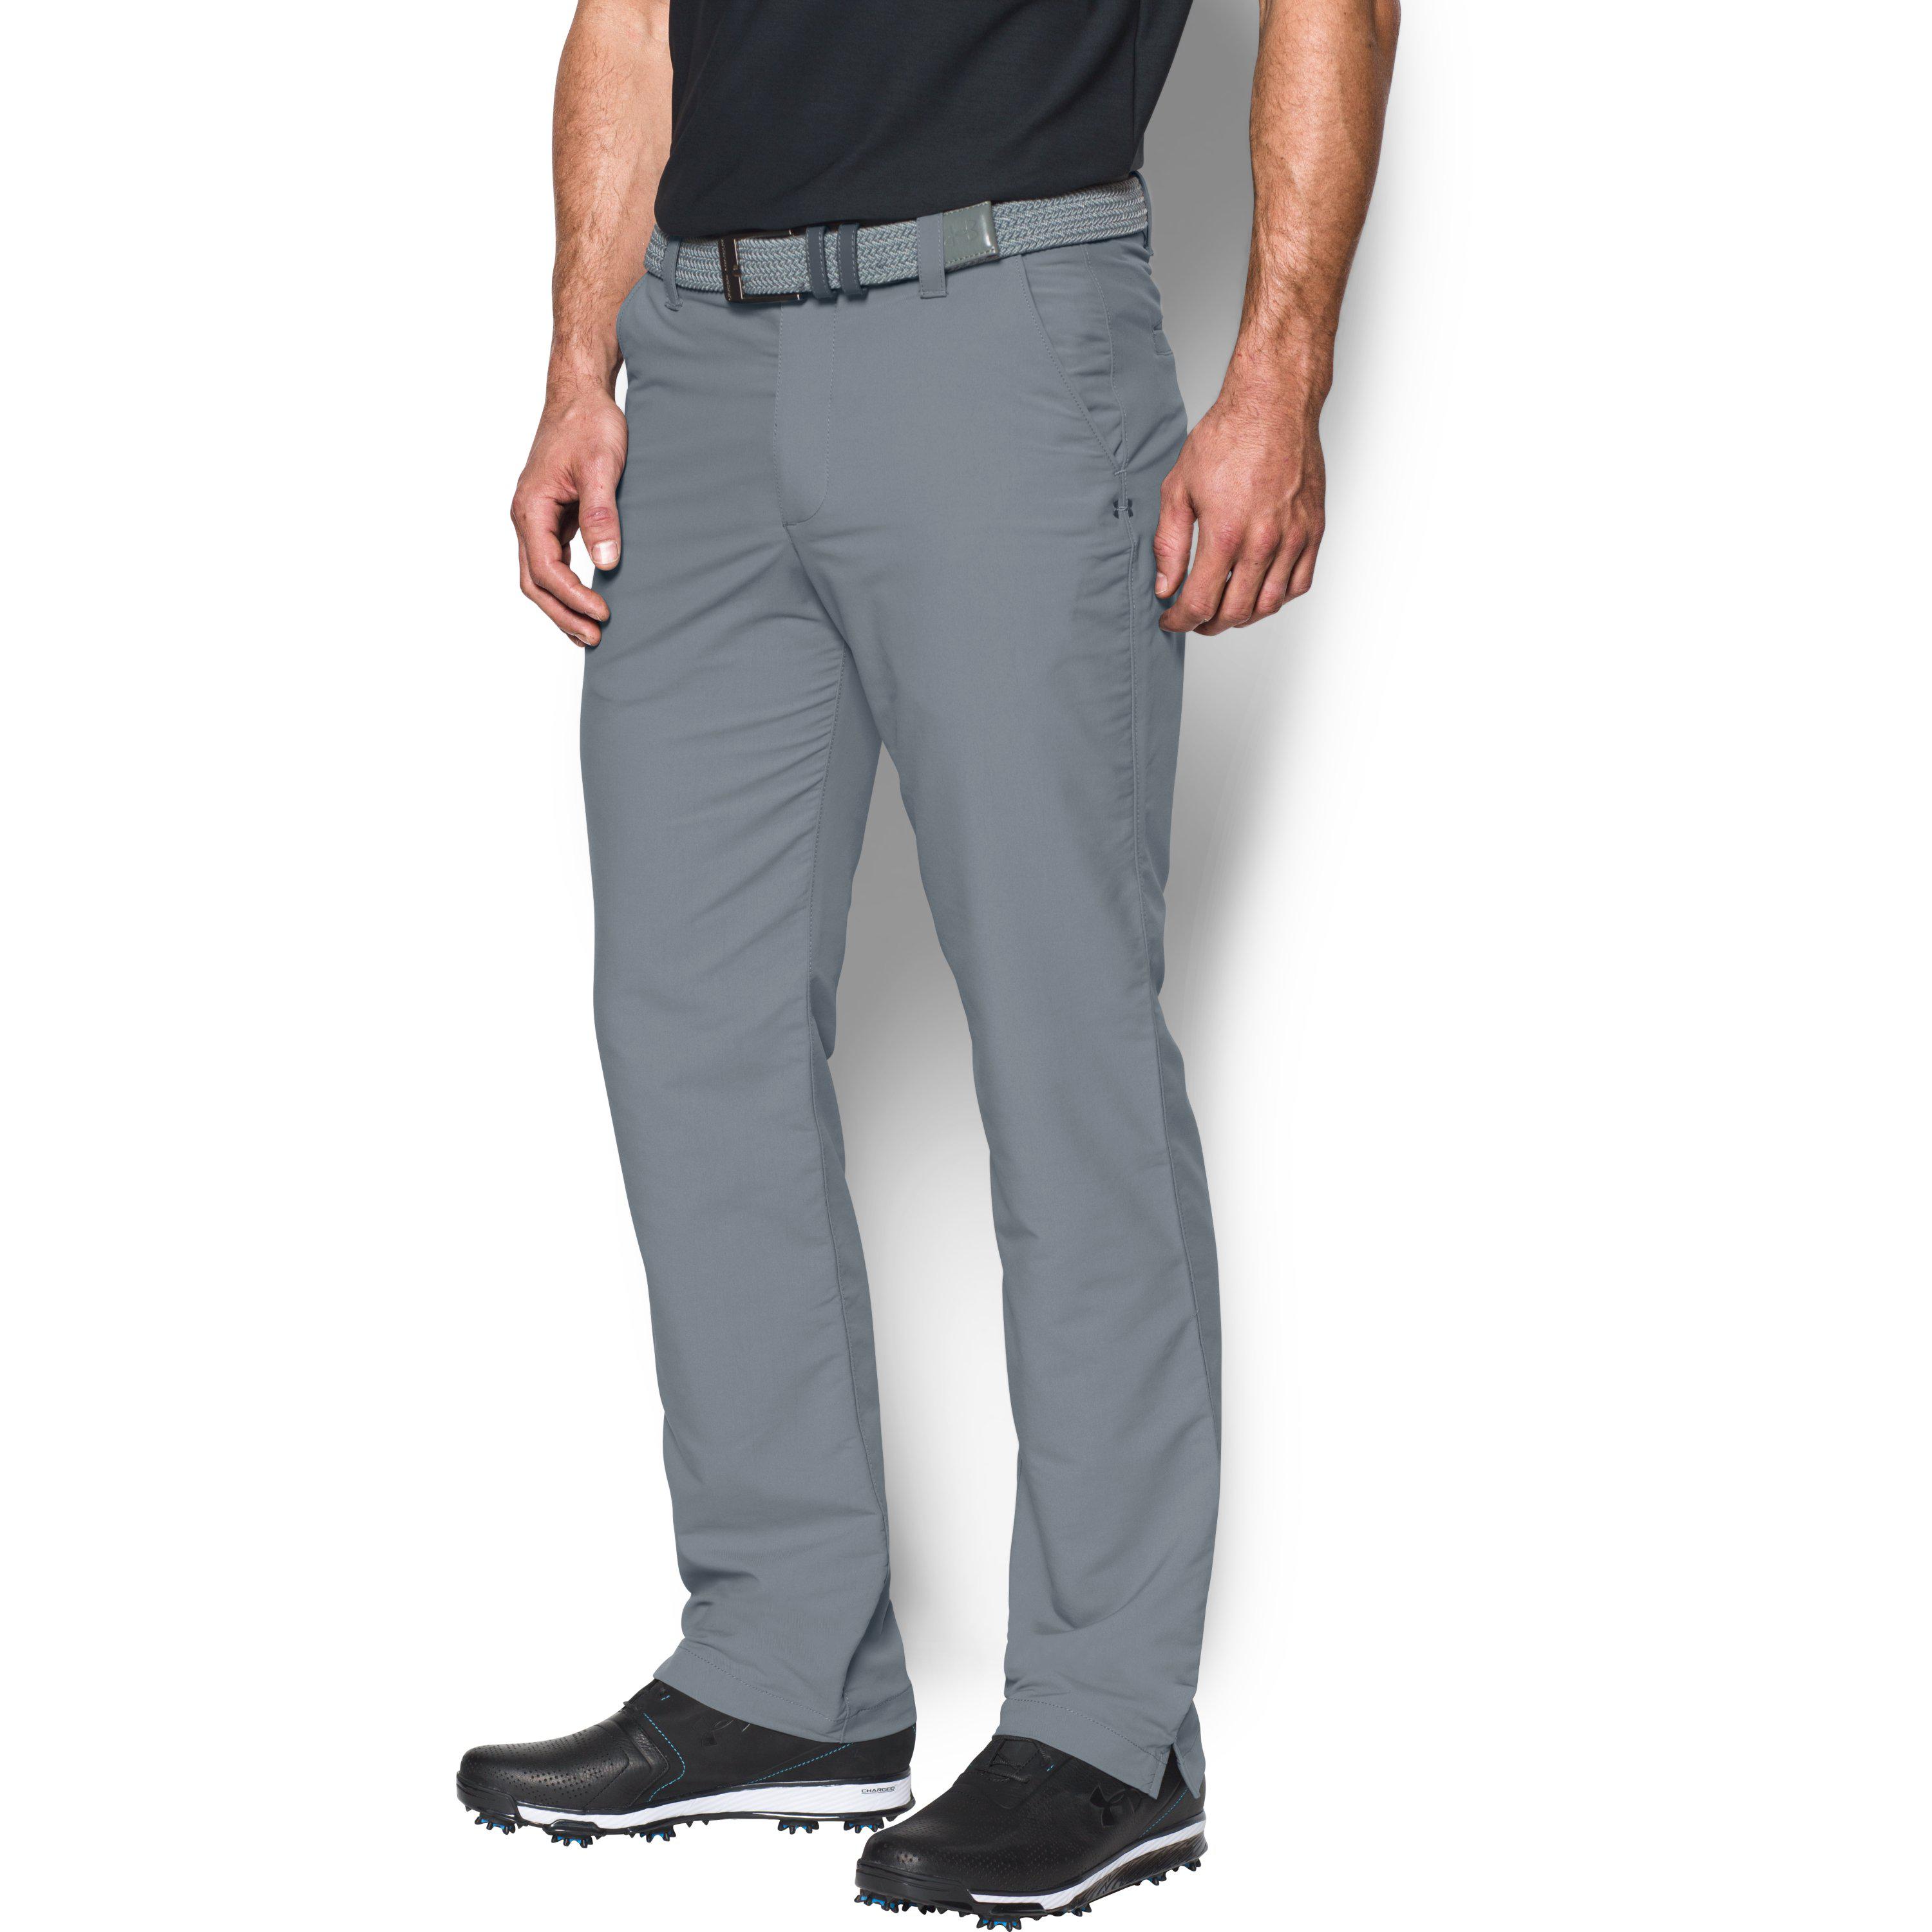 Under Armour Men's Ua Match Play Golf Pants in Grey for Men - Lyst